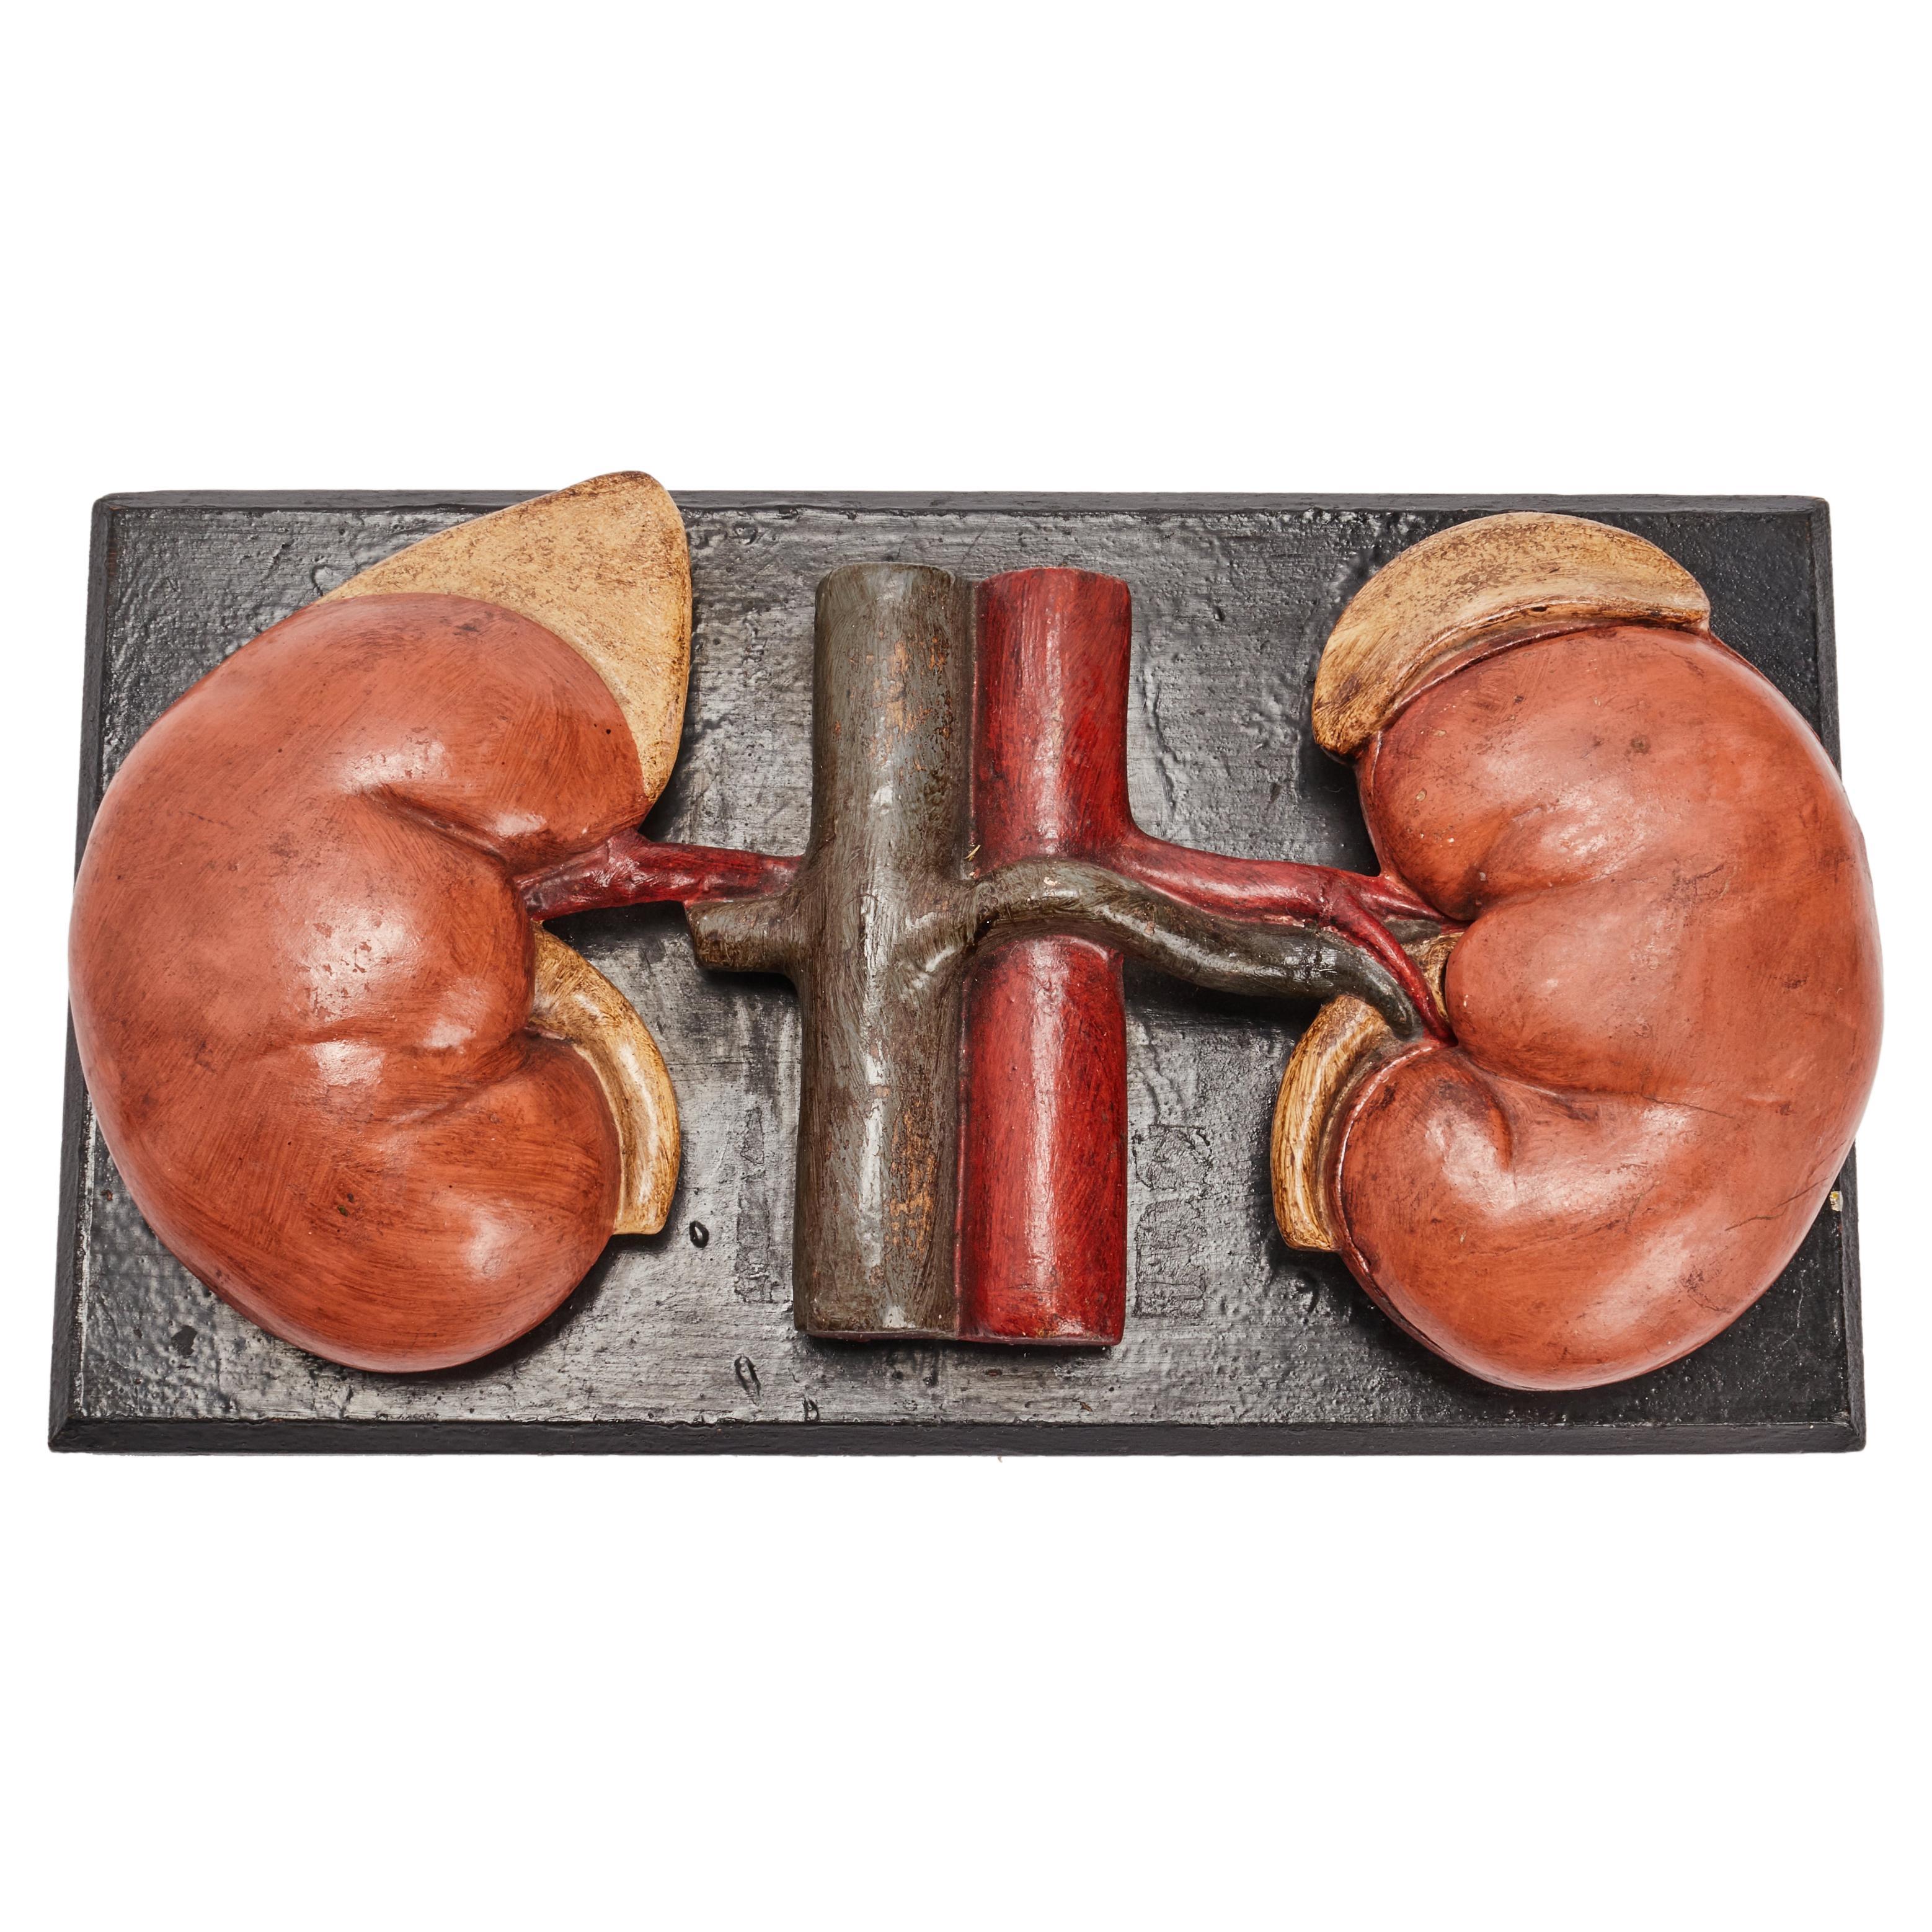 Anatomic Model for Class, Depicting the Kidneys, Spain 1890